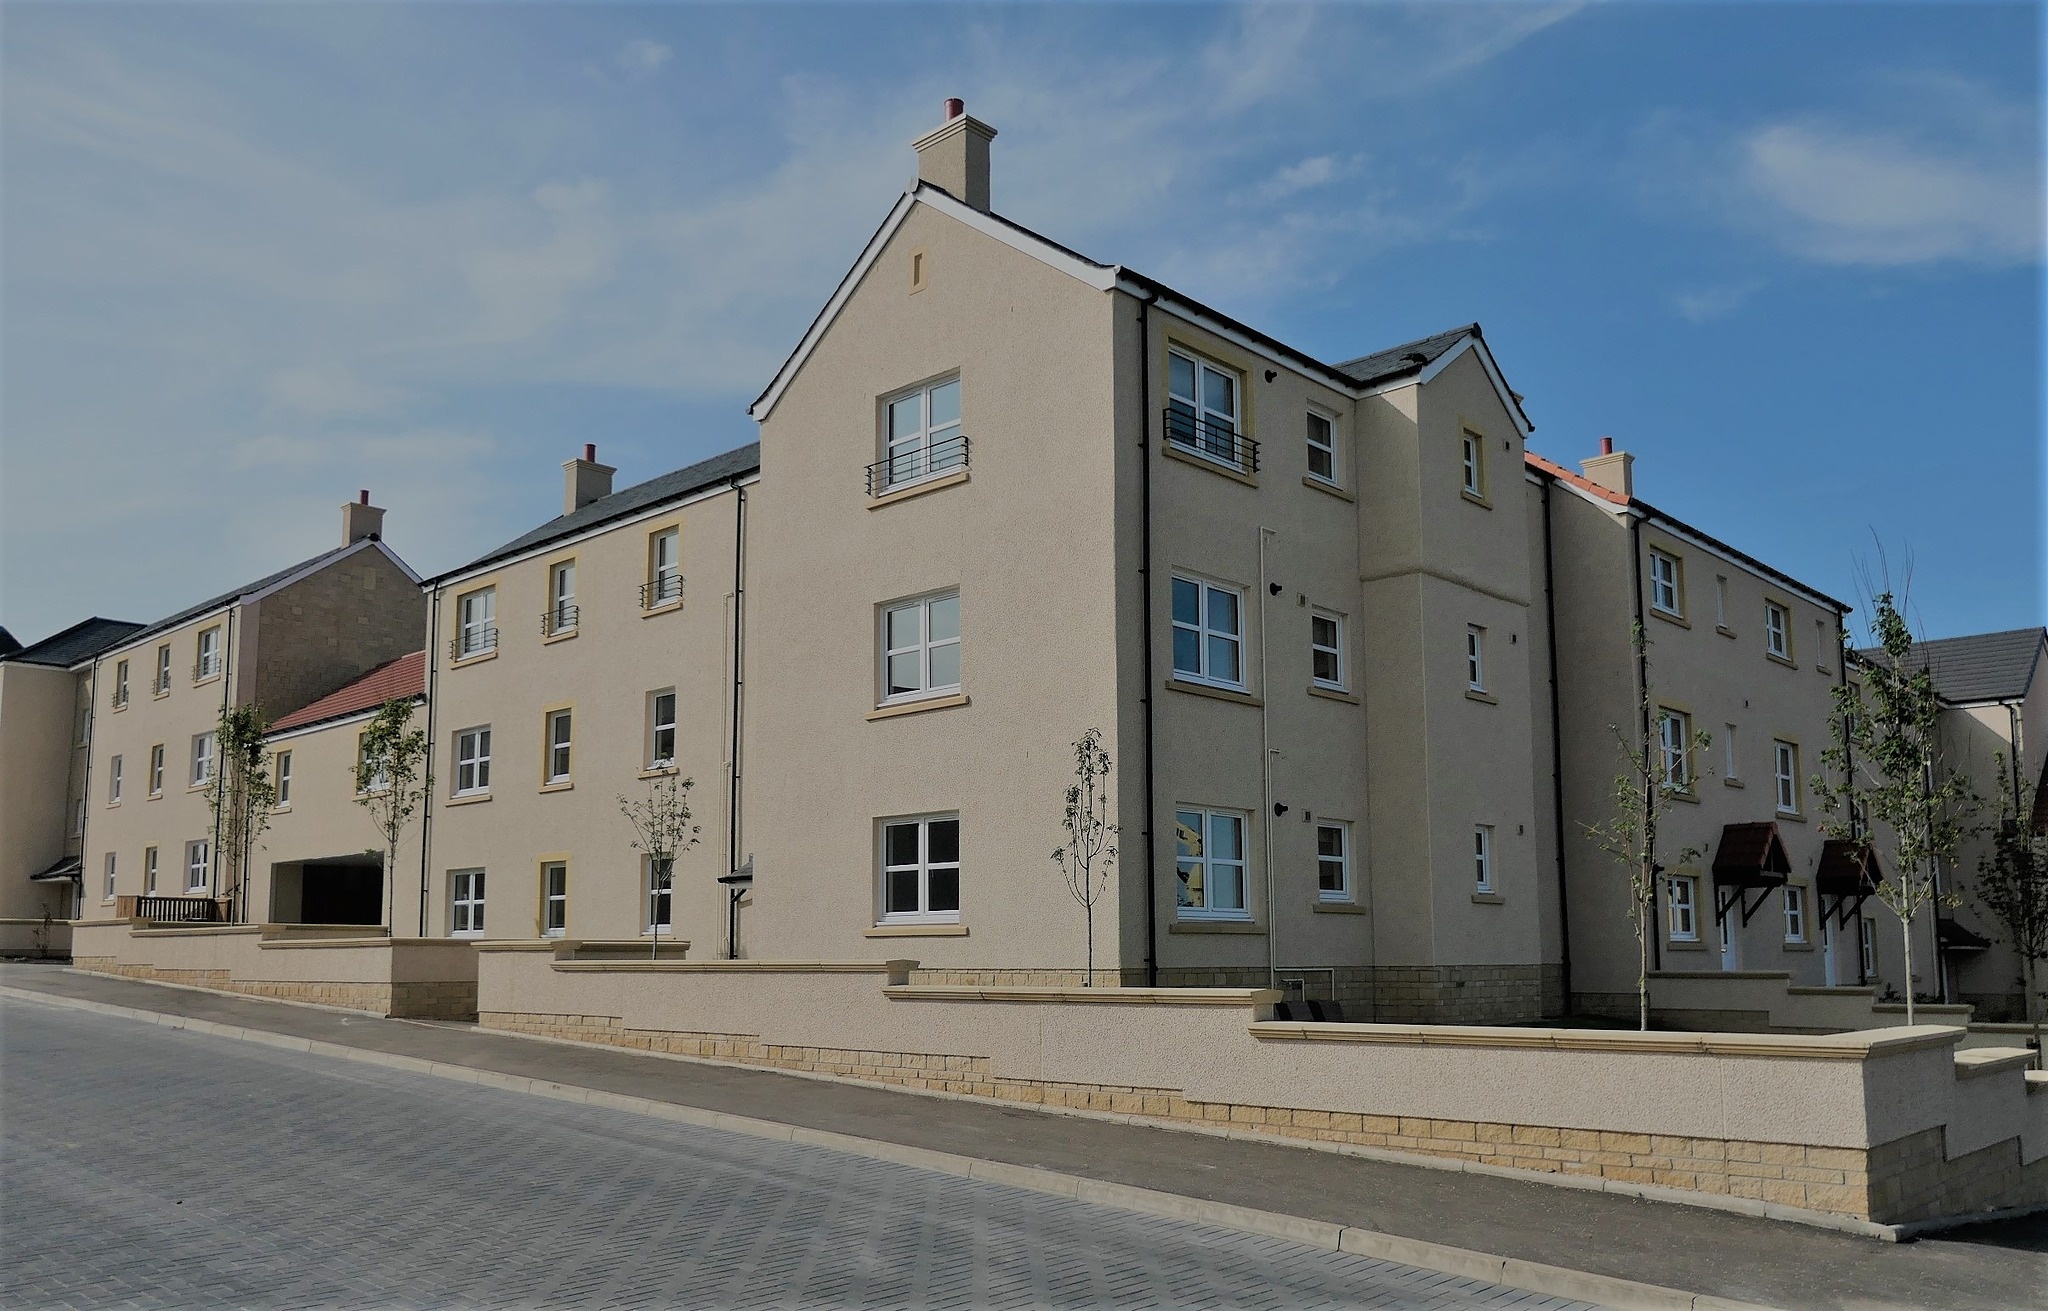 PfP Capital completes first two development sites in Scotland